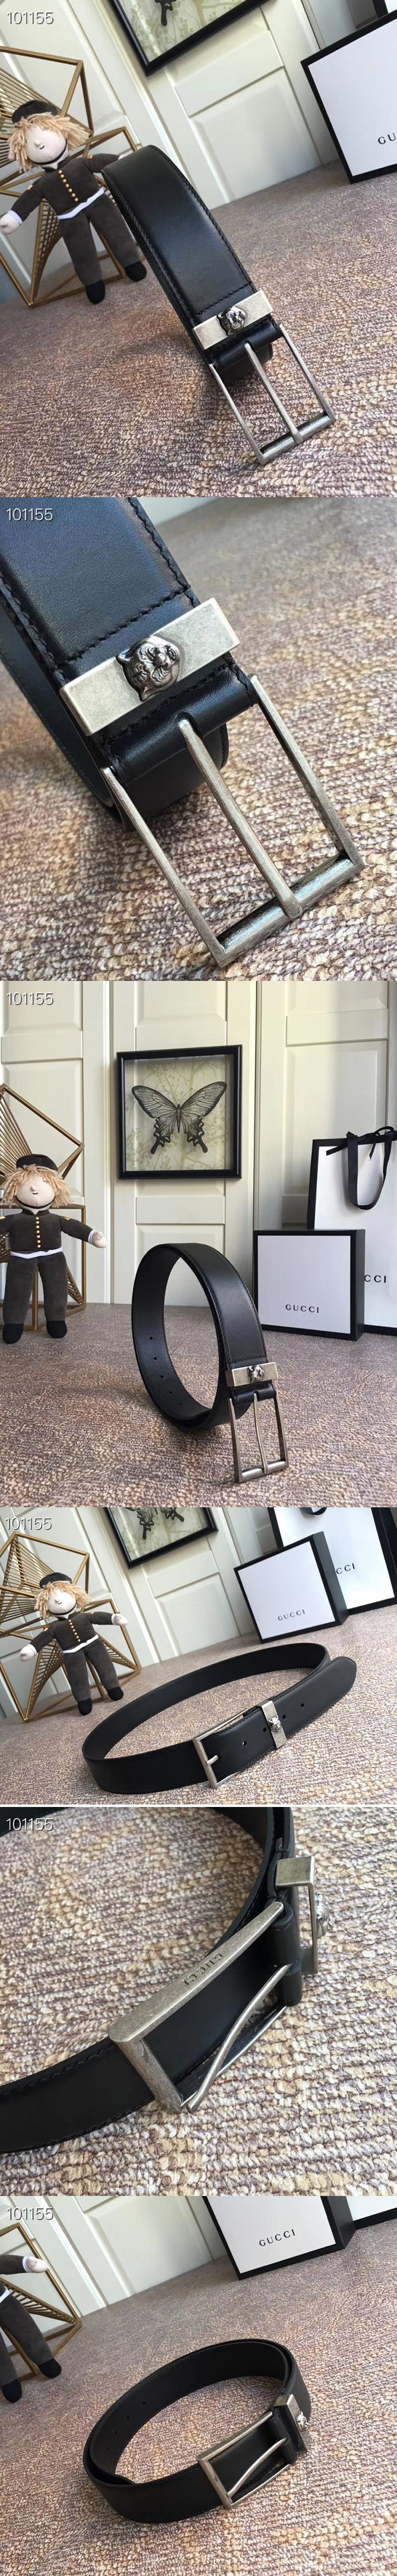 Replica Gucci 474811 4cm Leather belt Silver buckle in Black leather